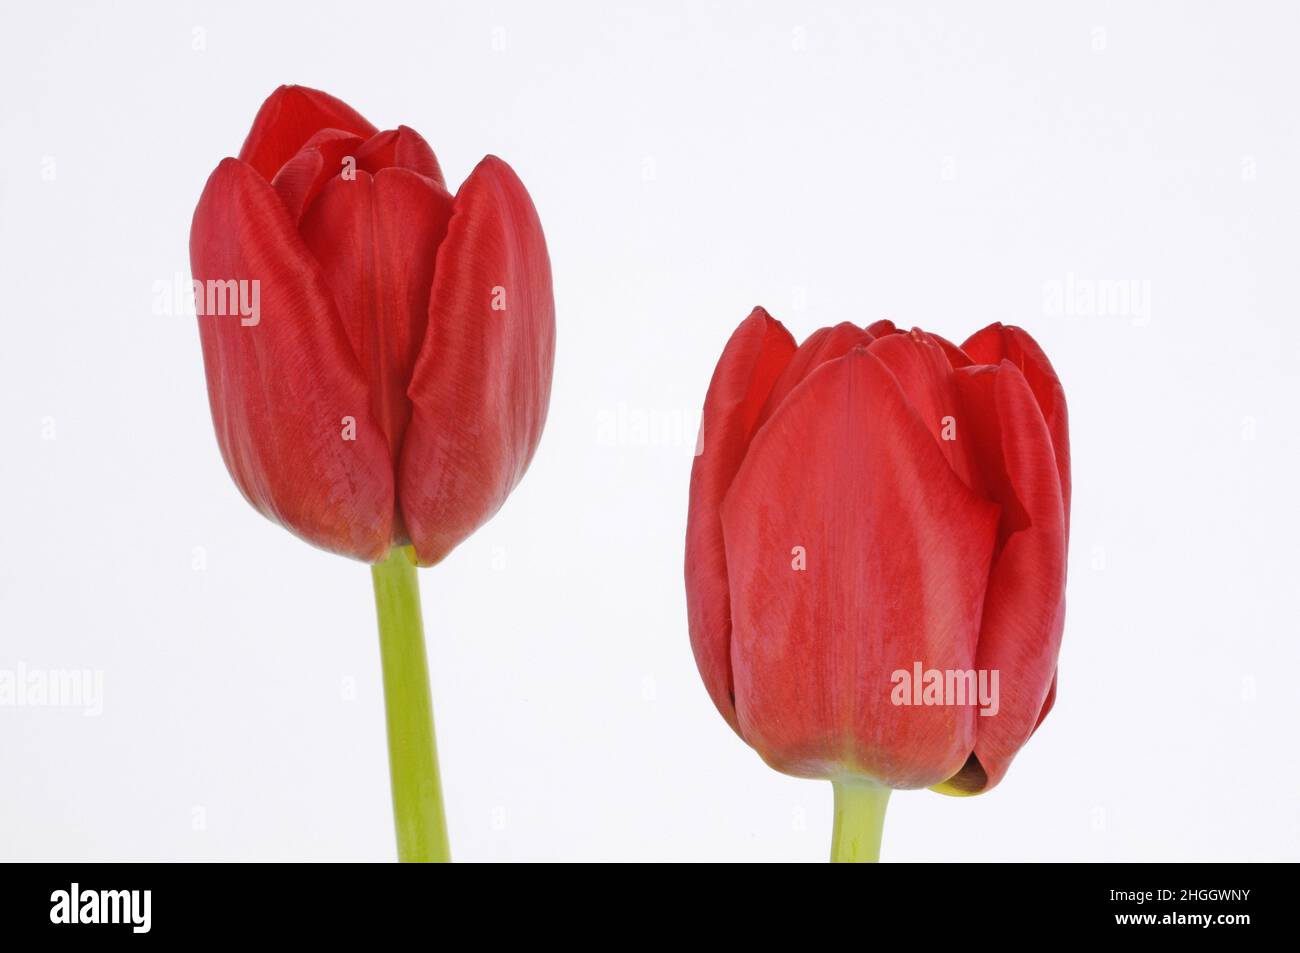 common garden tulip (Tulipa gesneriana), two red tulips in front of white background Stock Photo